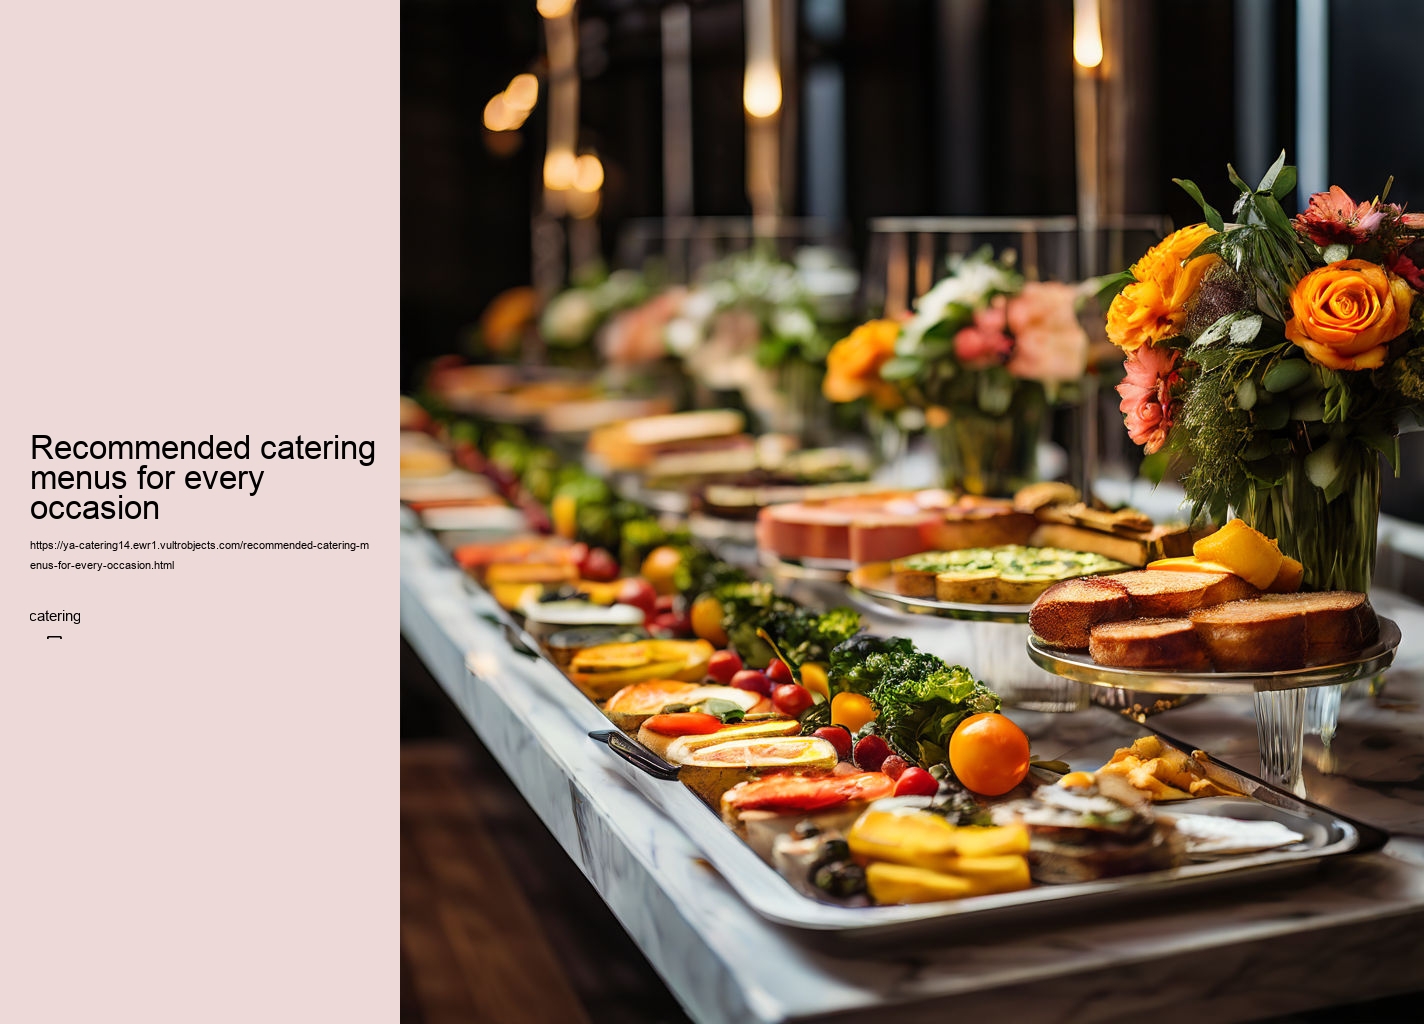 Recommended catering menus for every occasion